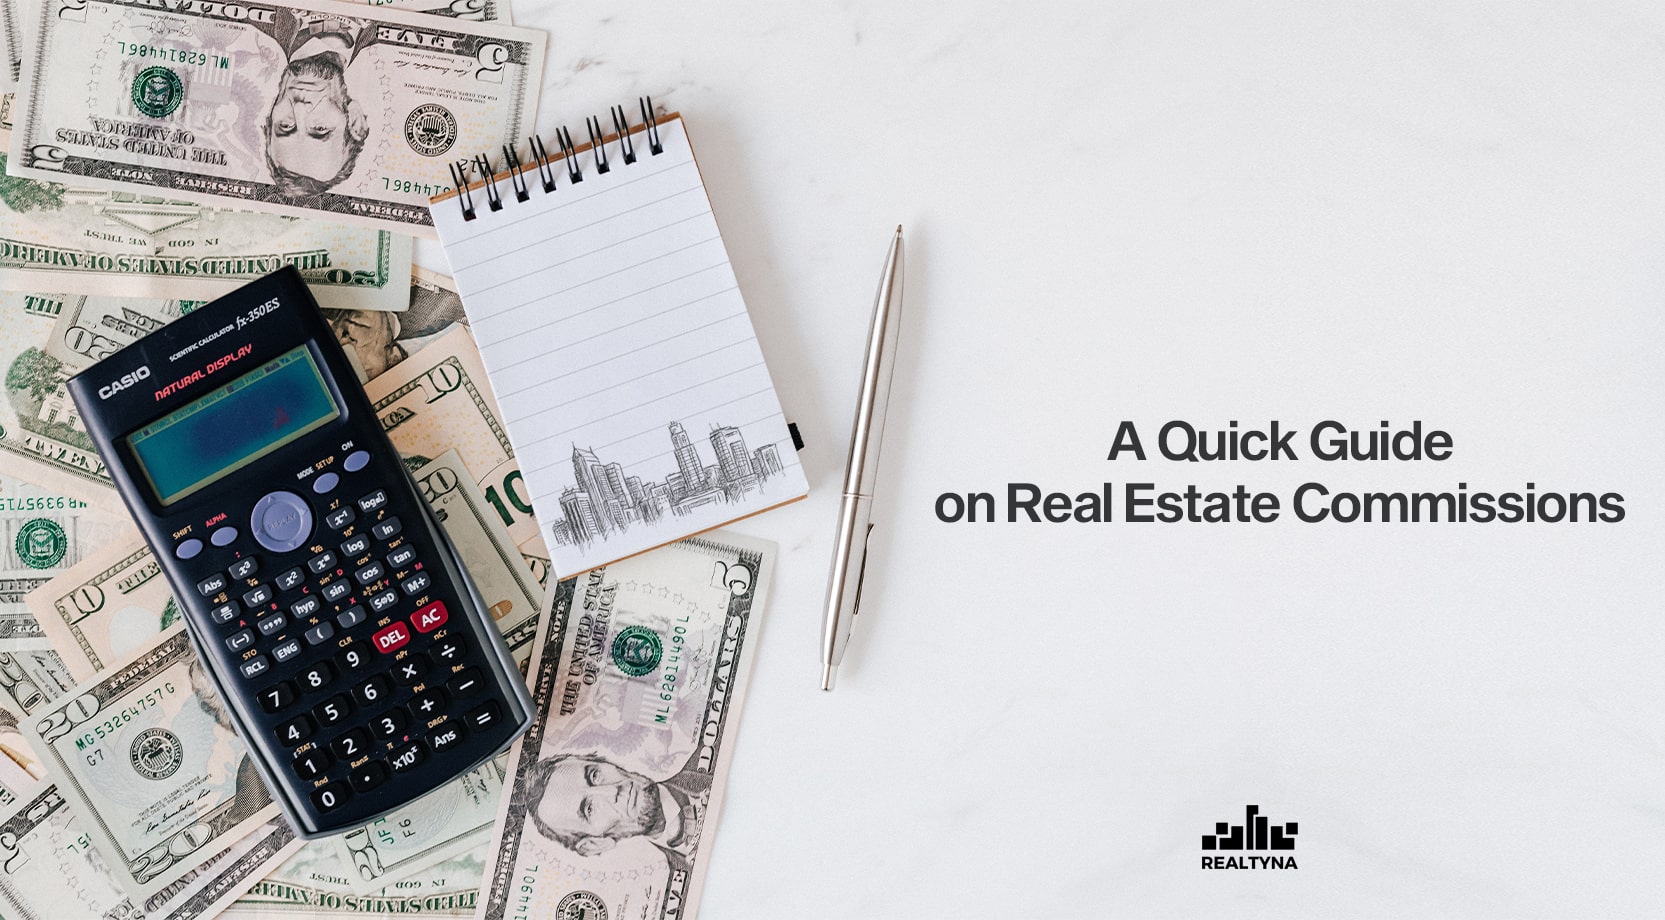 A Quick Guide on Real Estate Commissions